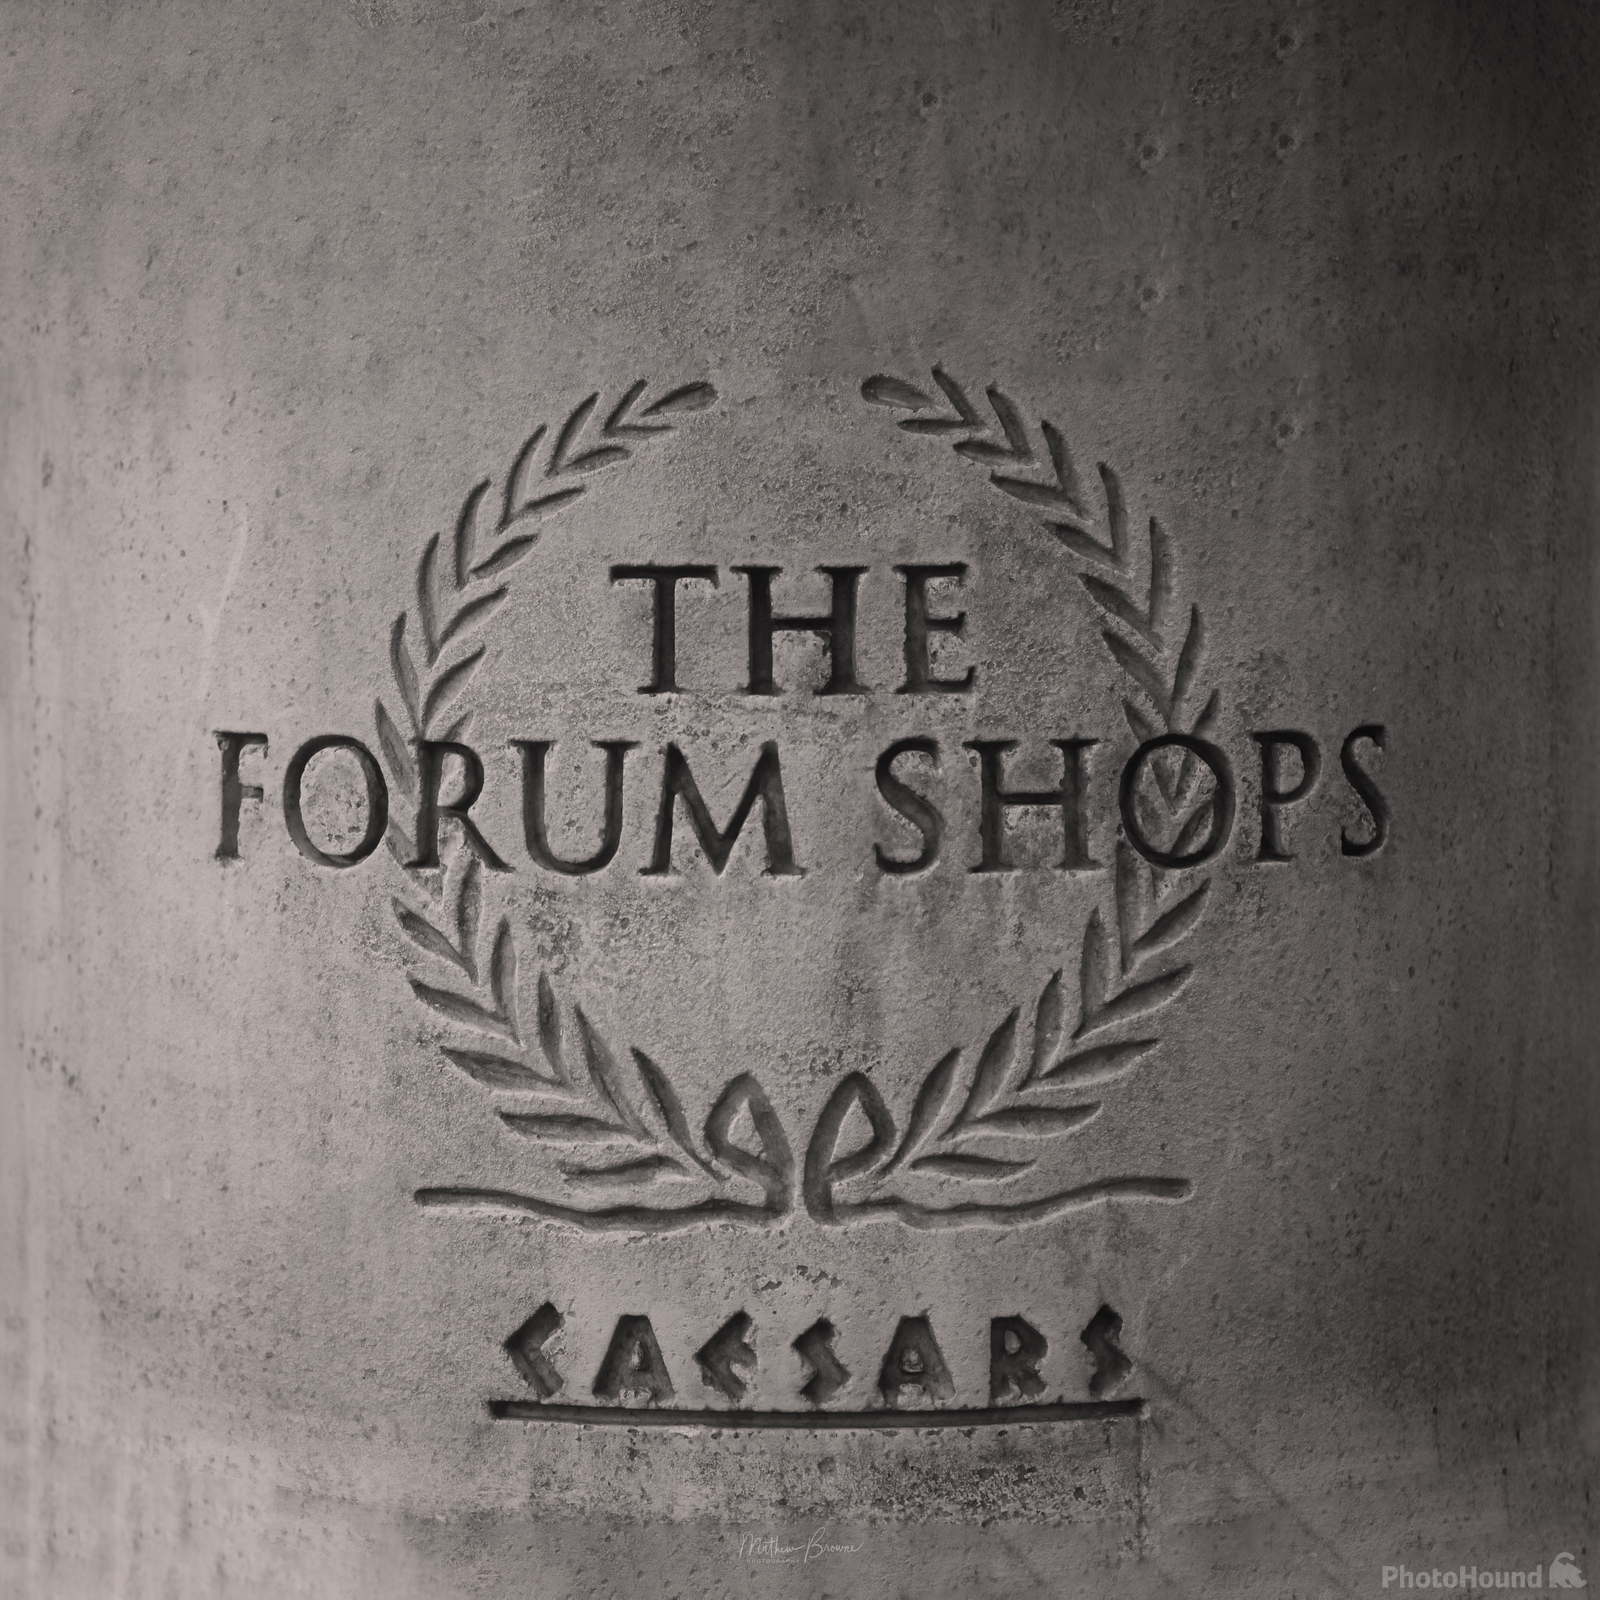 Image of The Forum Shops at Caesars by Mathew Browne